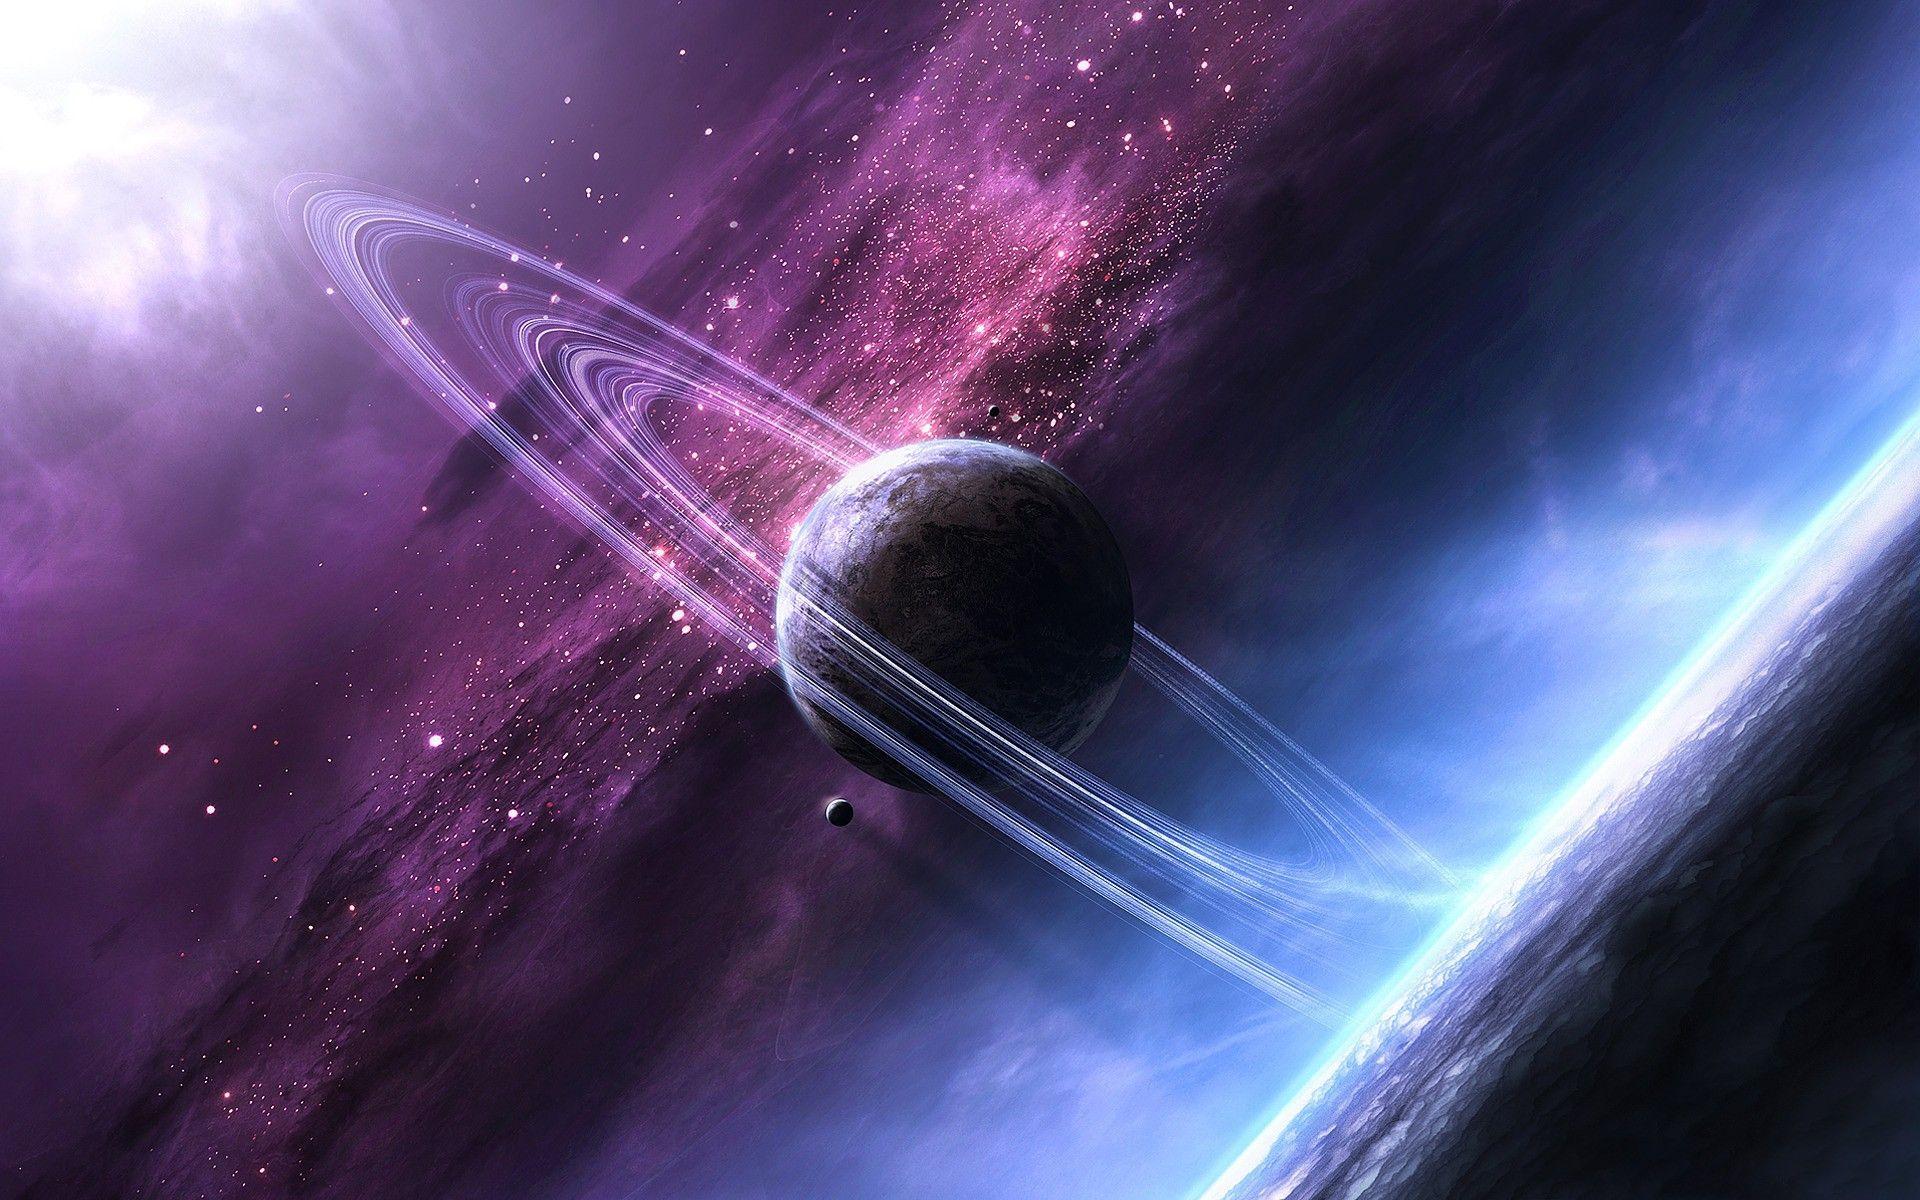 Download wallpaper 1920x1080 saturn, space, planet of rings, full hd, hdtv,  fhd, 1080p wallpaper, 1920x1080 hd background, 1304